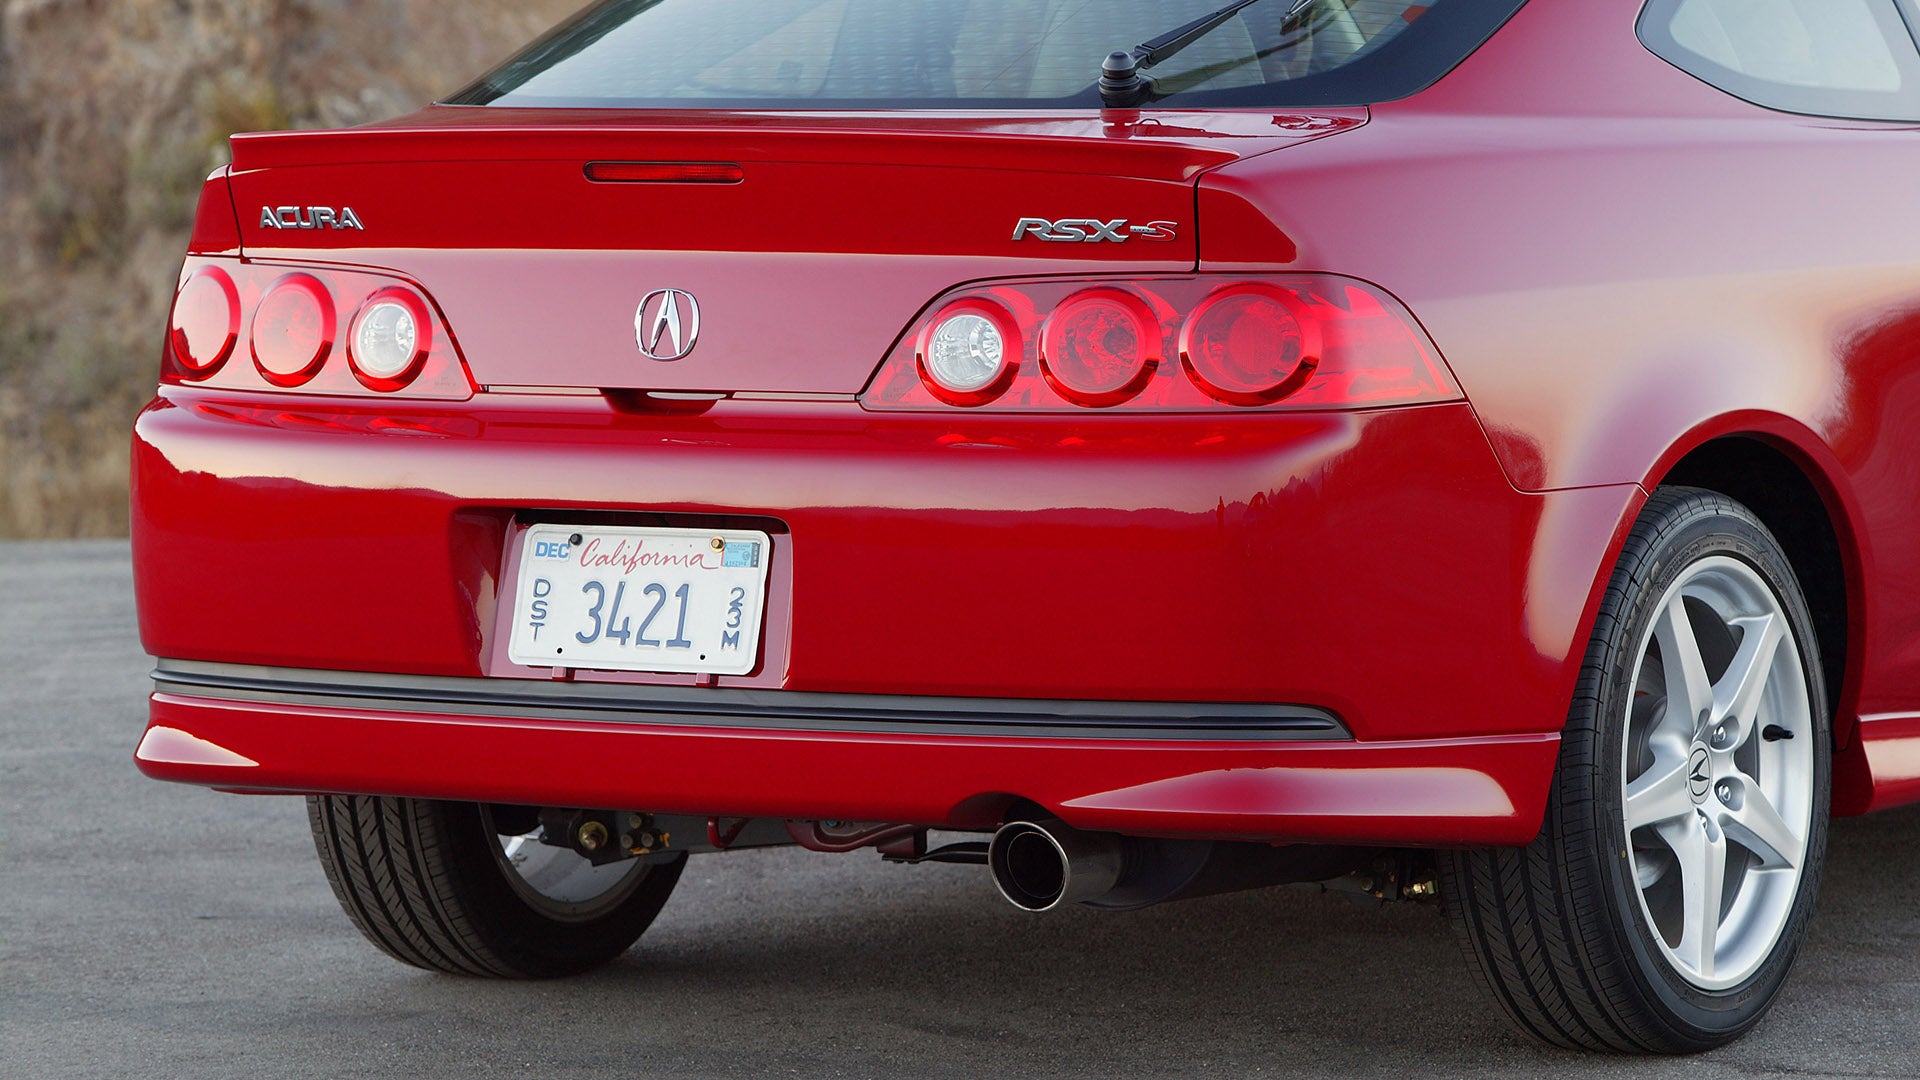 <p class="caption-title">2005-2006 Acura RSX Type S</p>, The Acura RSX Type S debuted for 2002 and received a refresh for 2005., <i>Acura</i>